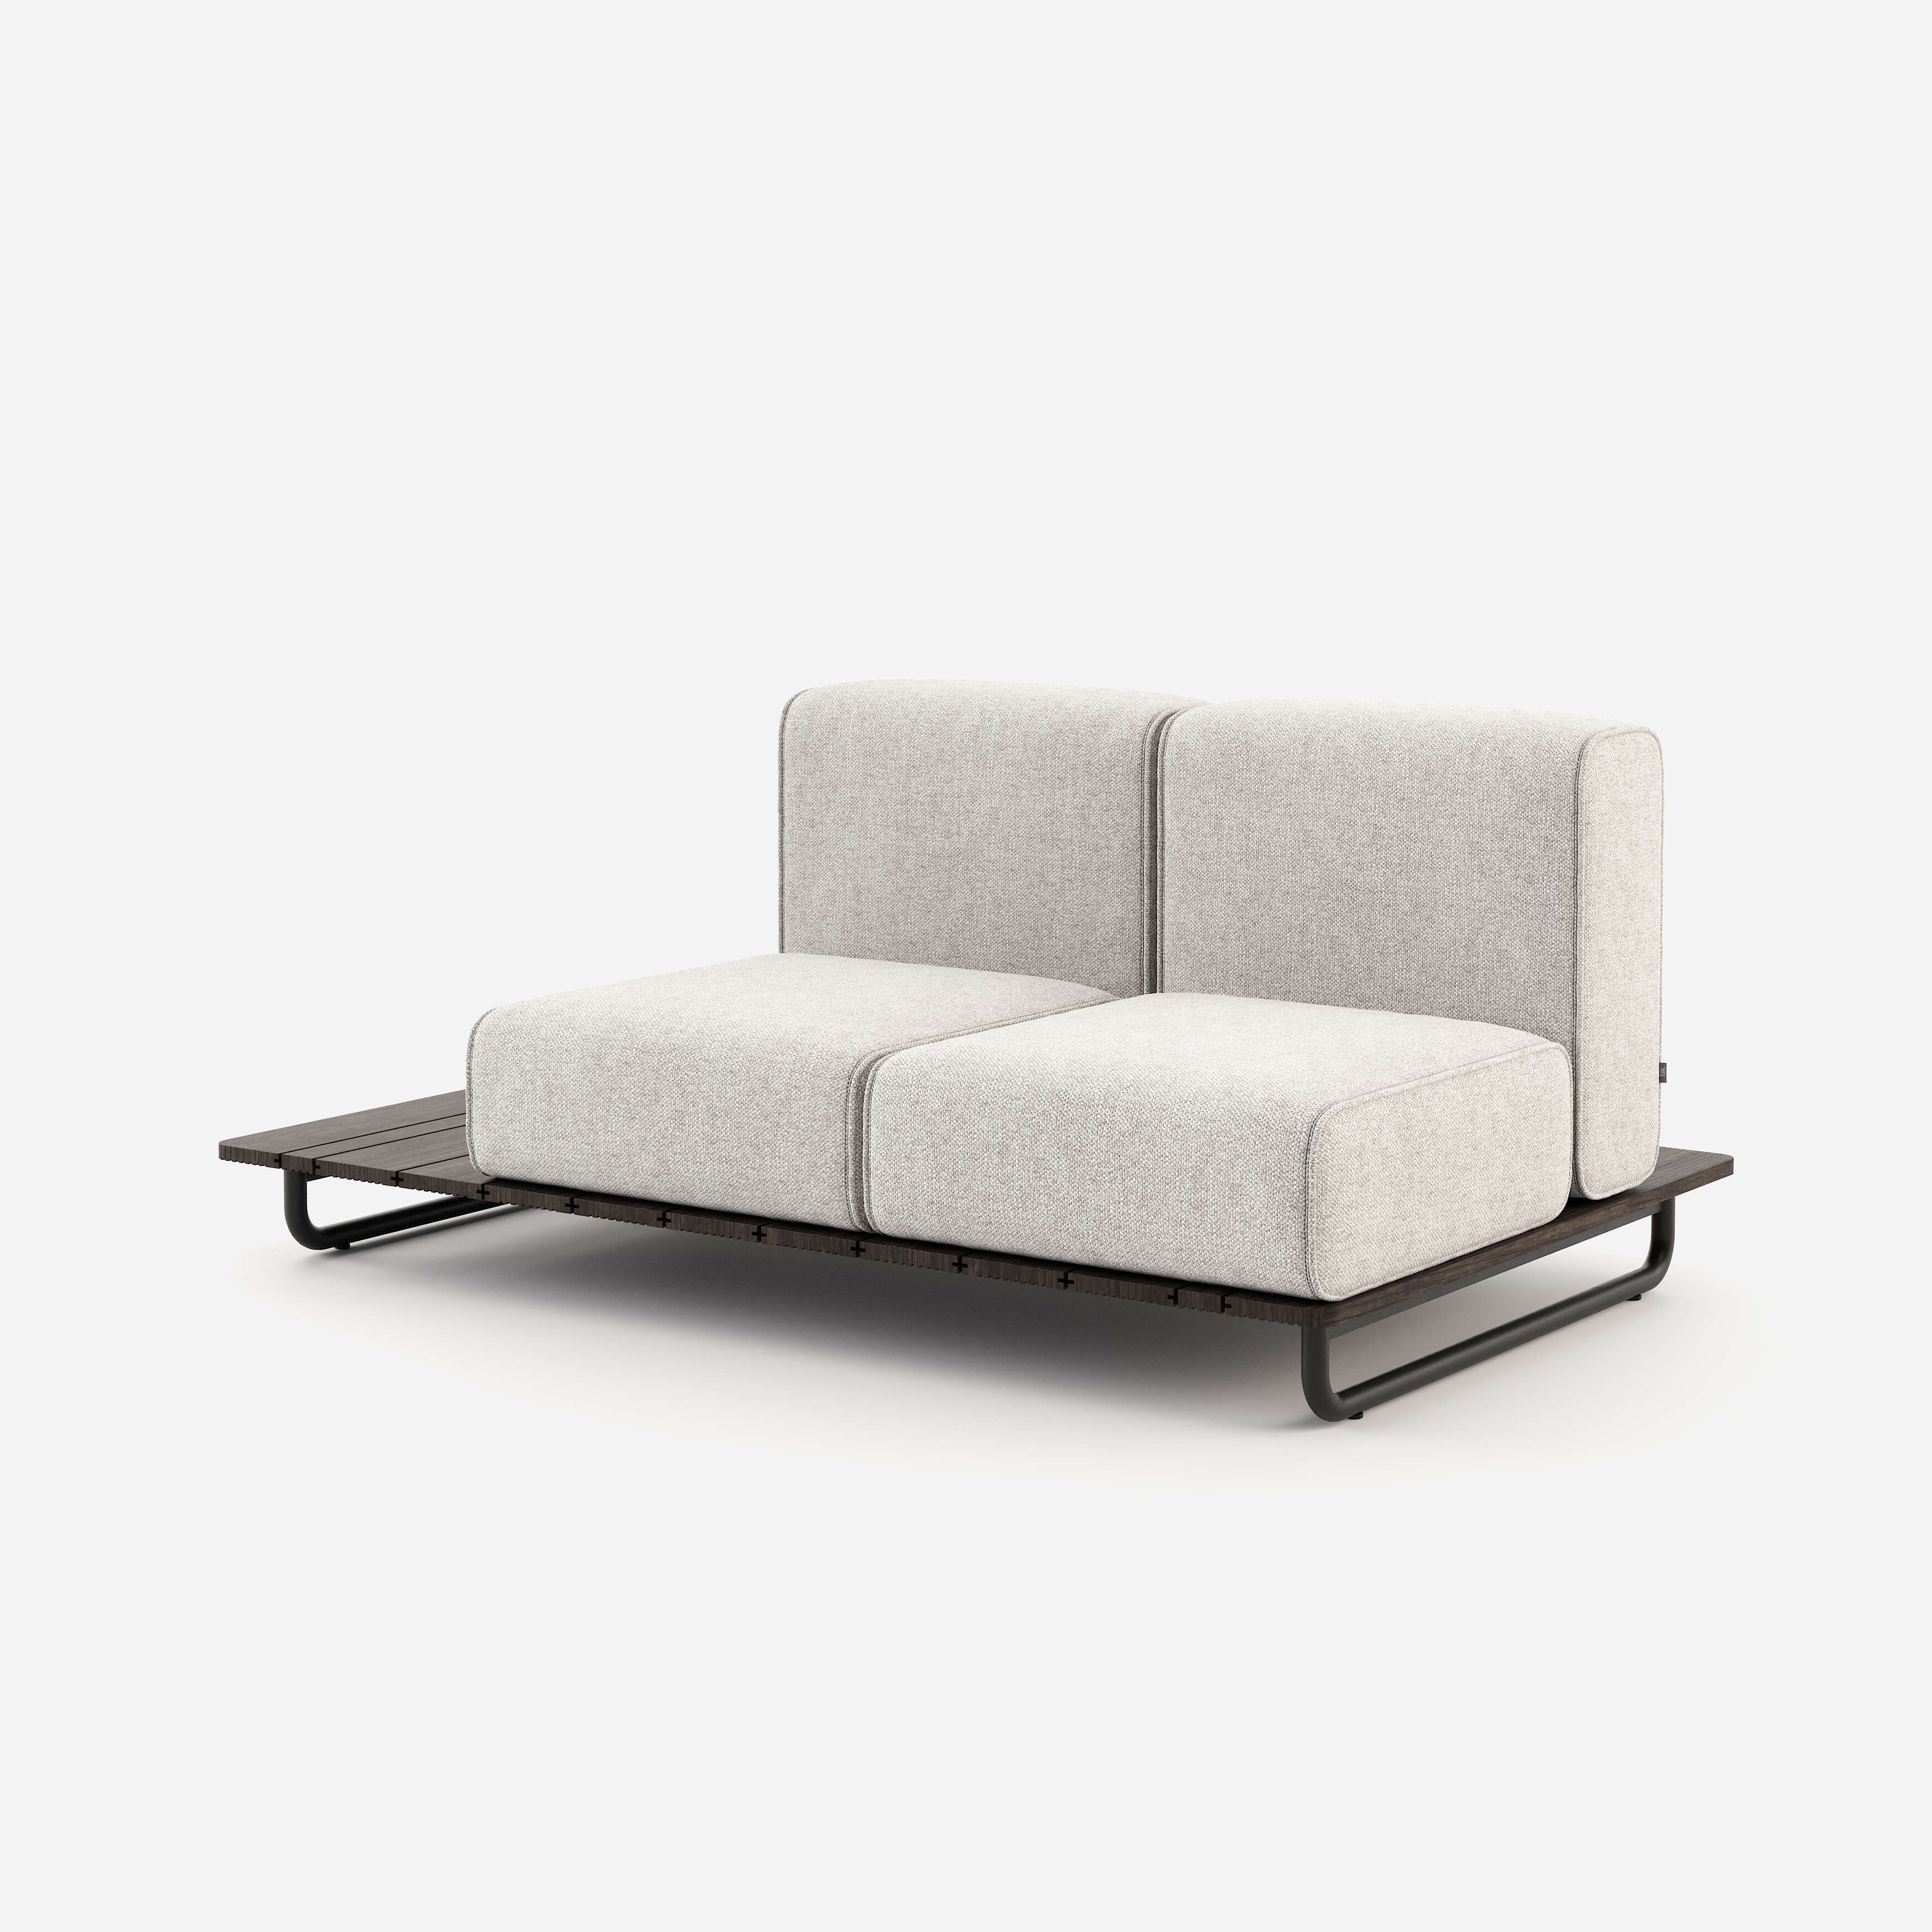 Copacabana-Sofa-with-Right-Armrest-white-outdoor-collection-summer-domkapa-upholstered-furniture-1